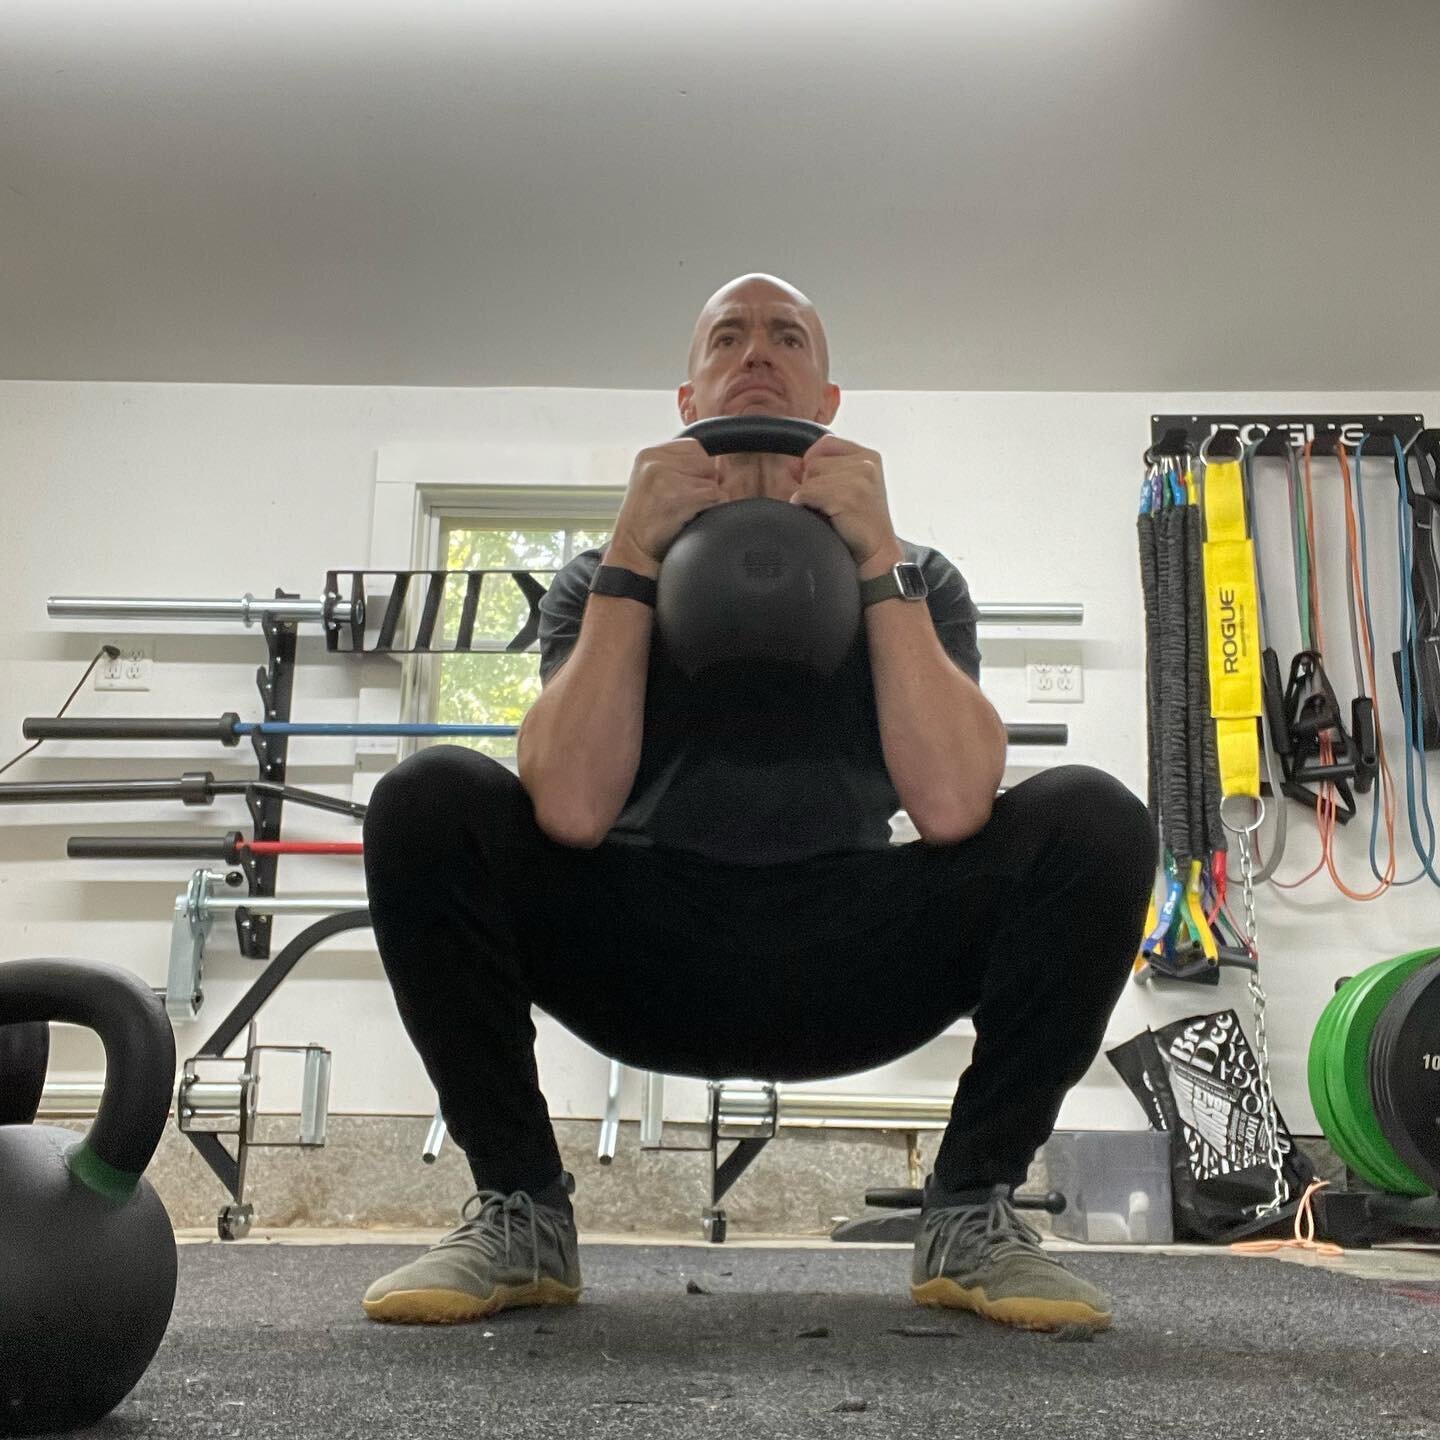 Nothing fancy, simply learning to enjoy key movements daily for building lasting strength and resilience. I never enjoyed squats as they left me burnt out and sore for days, now I&rsquo;m doing goblet KB squats 4 days per week gradually building volu